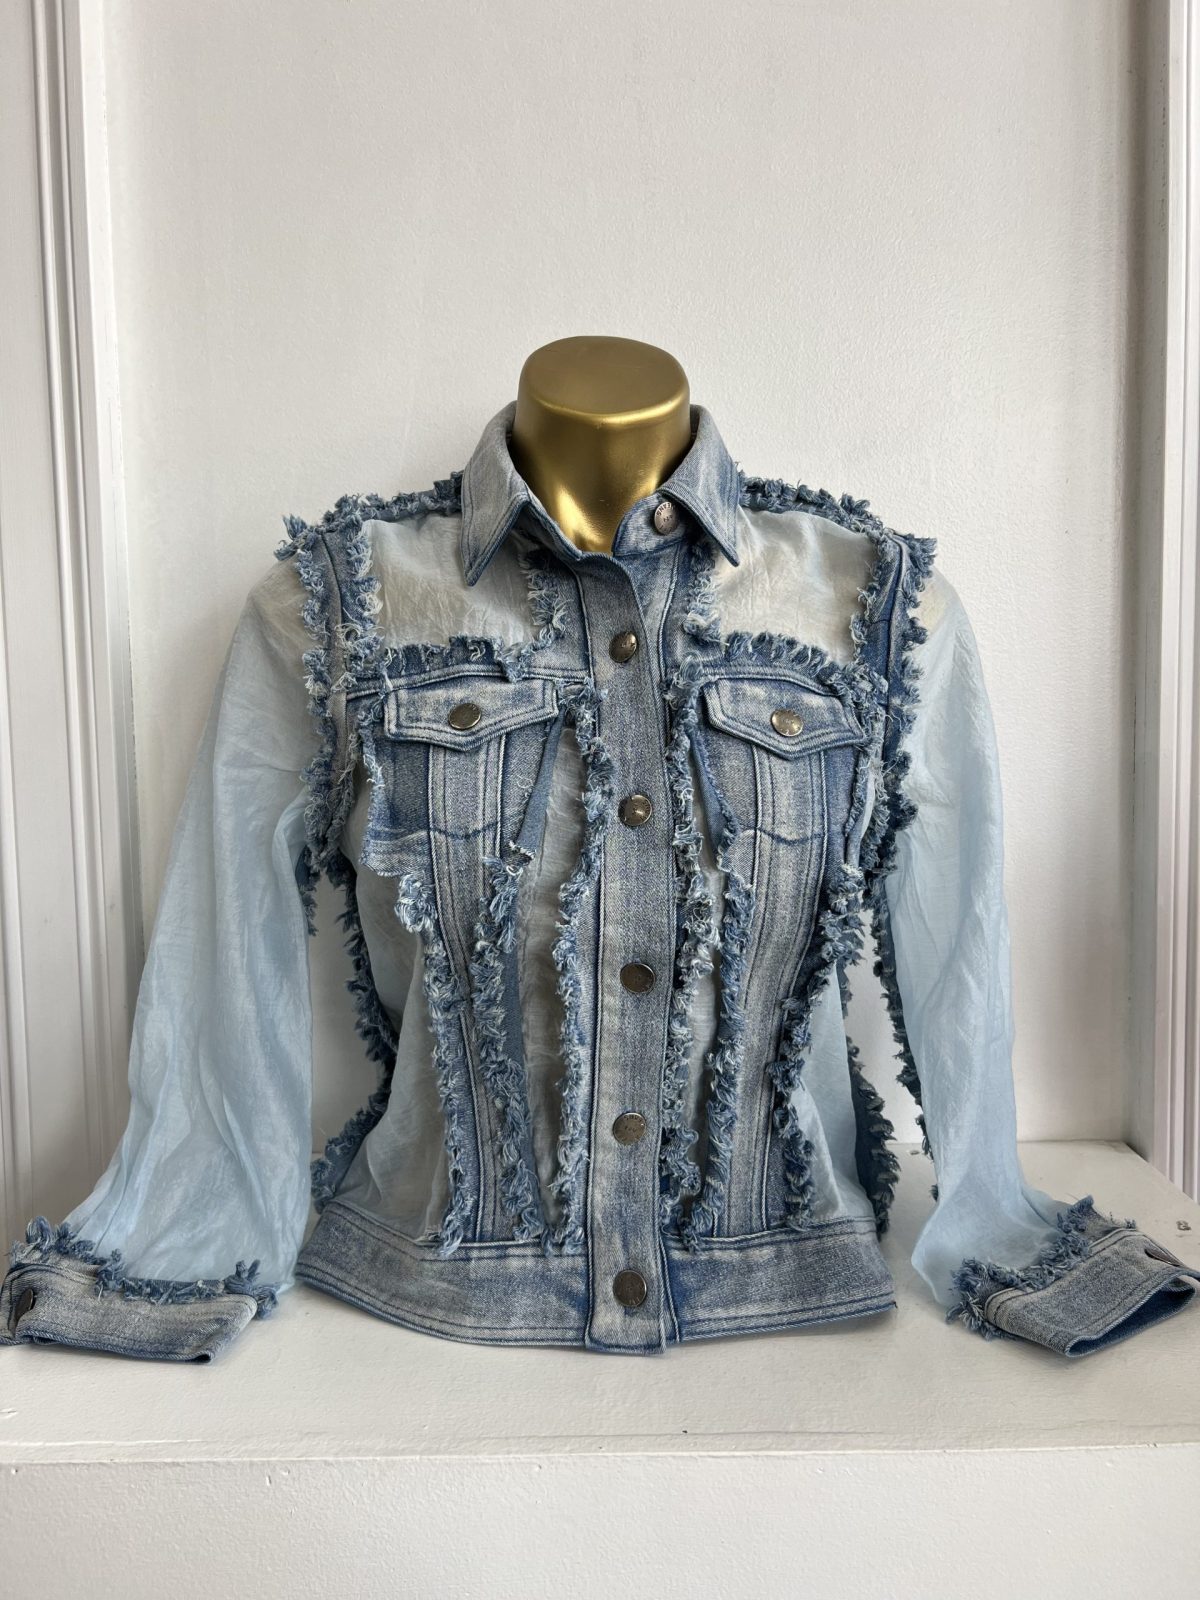 AZI Z12330 Sheera Denim Long Sleeve Sheer and Ruffle Accents Jacket | Ooh Ooh Shoes women's clothing and shoe boutique located in Naples and Mashpee